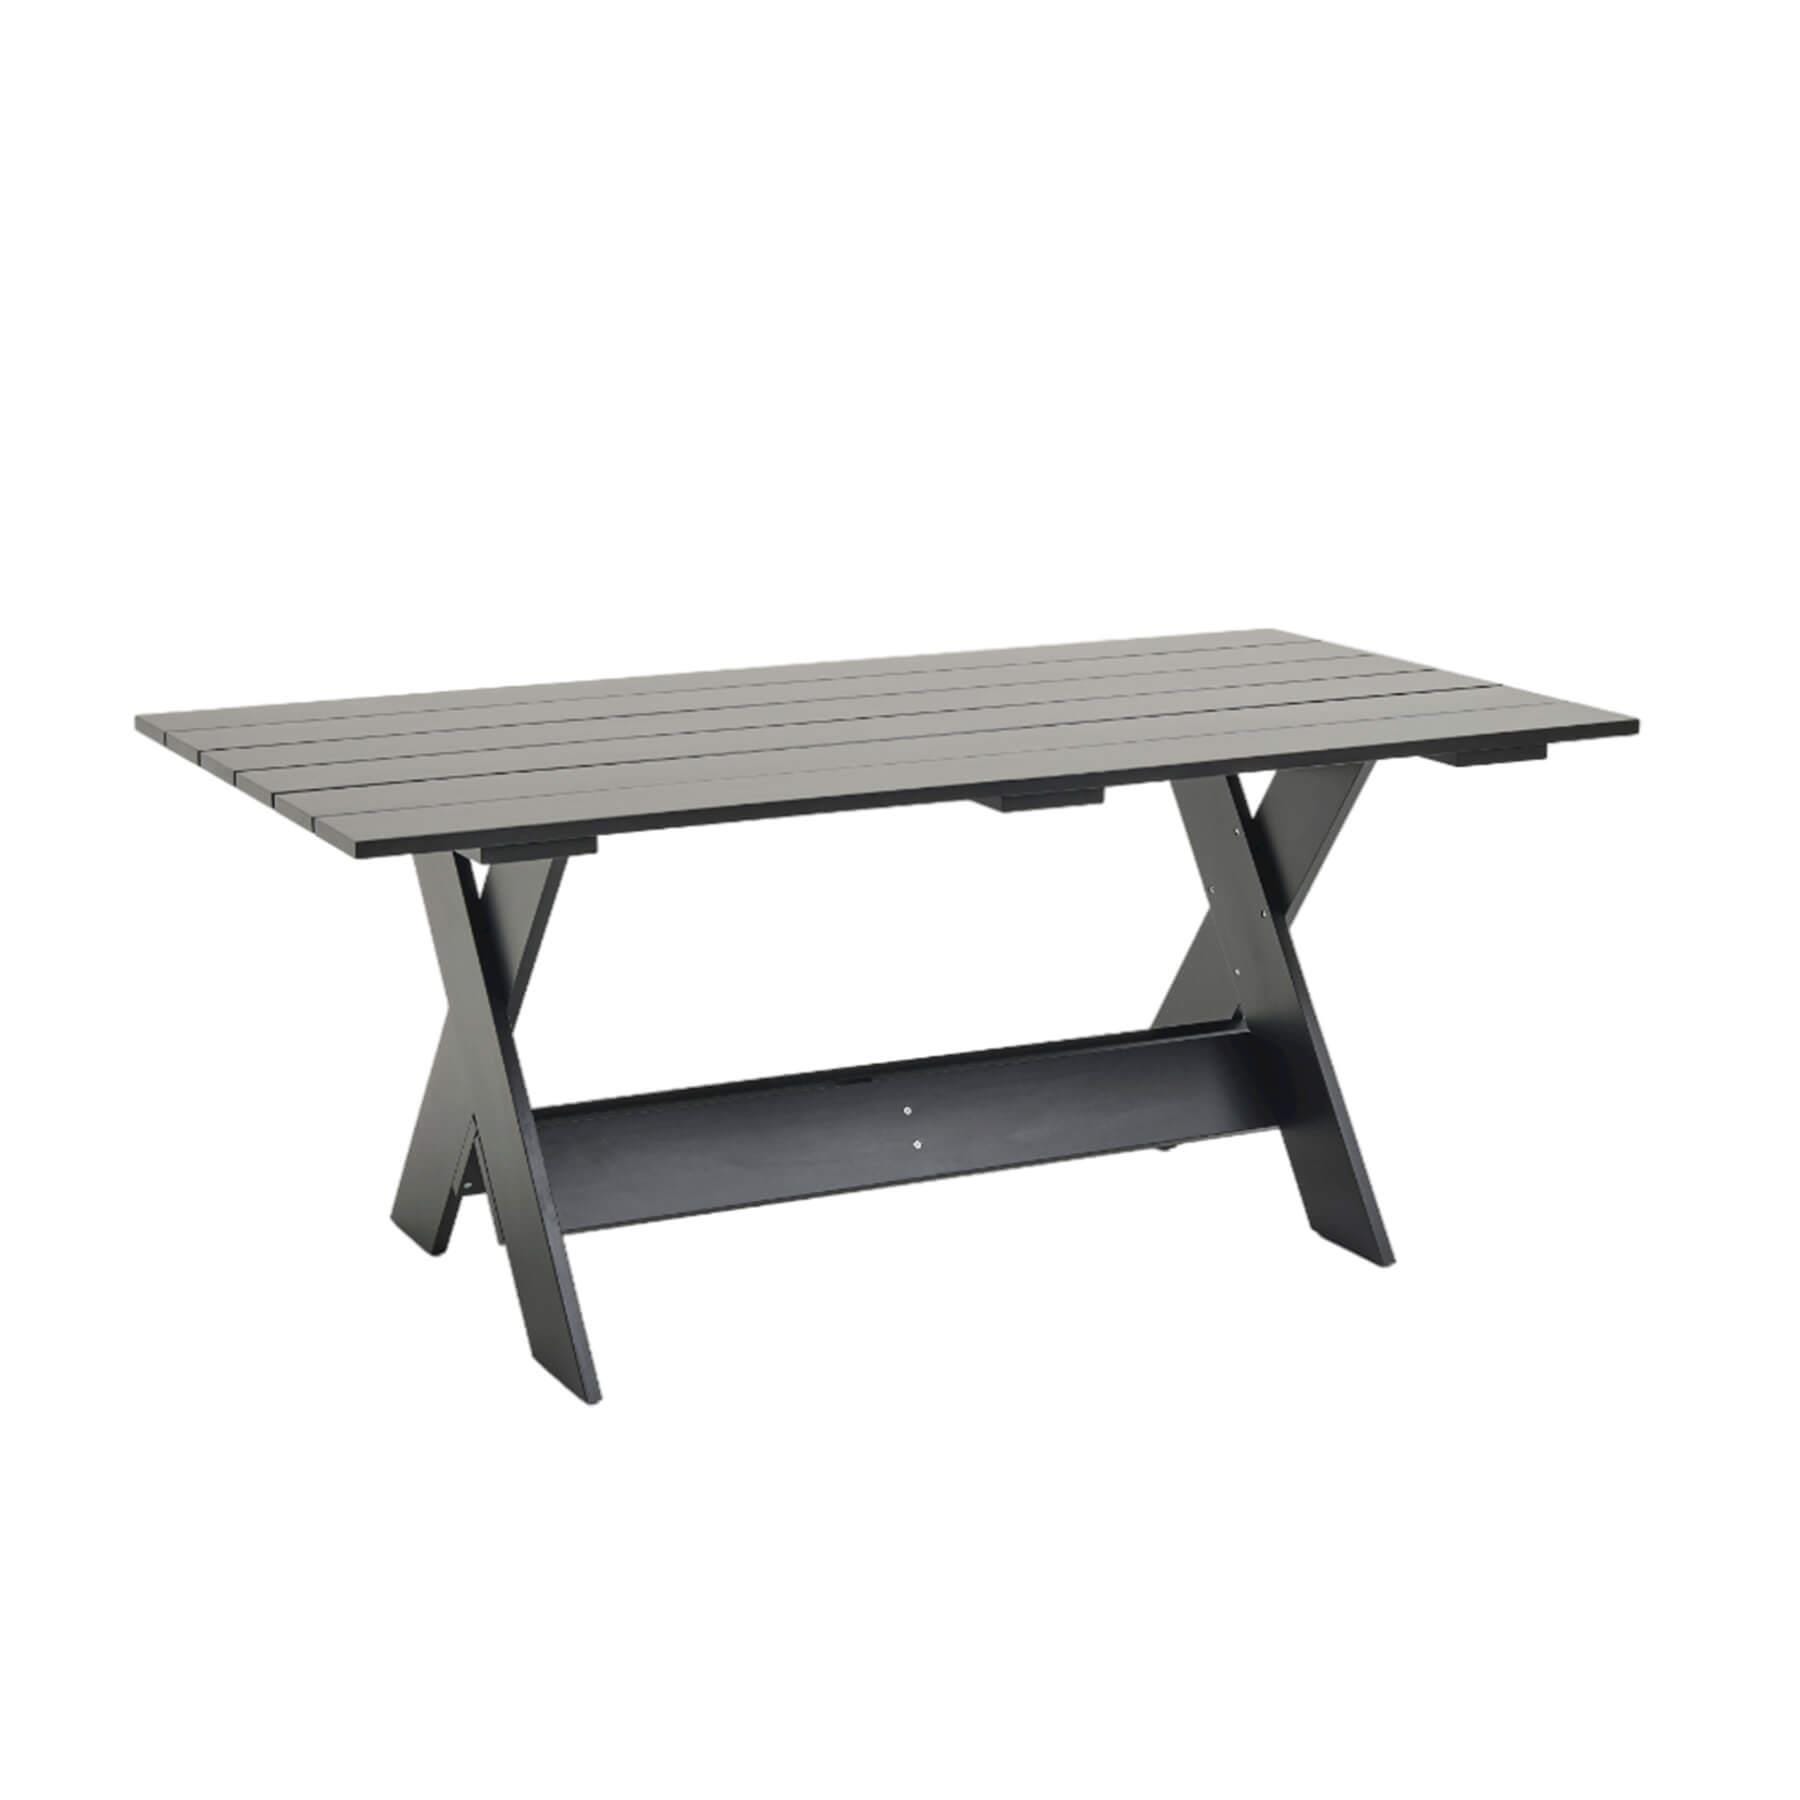 Hay Crate Dining Table 180 X 89 Black Designer Furniture From Holloways Of Ludlow